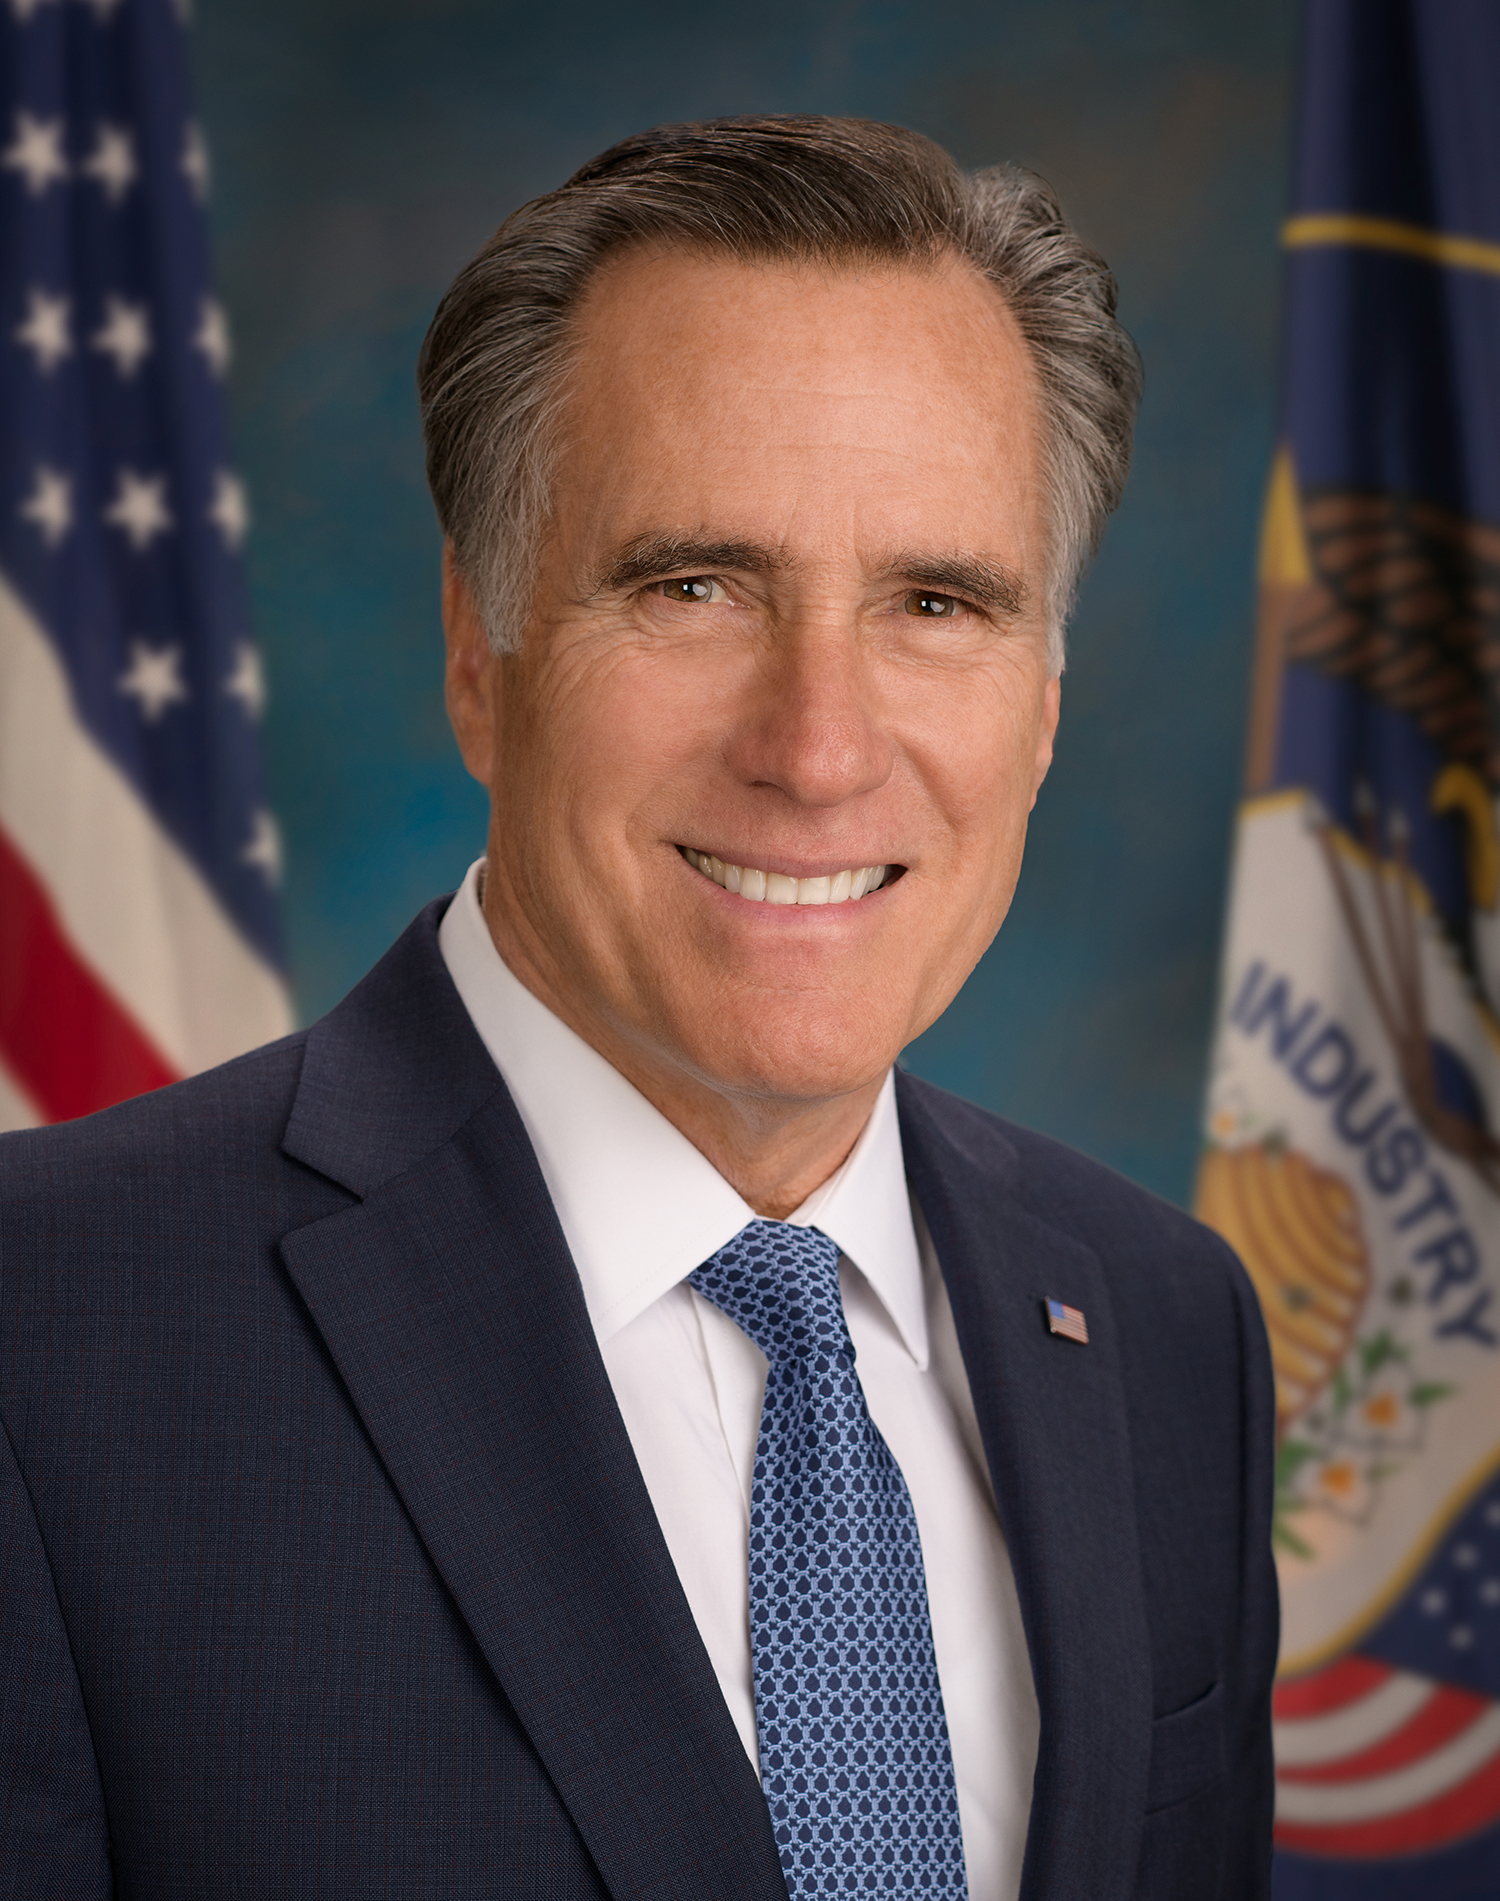 The 74-year old son of father George W. Romney  and mother Lenore Romney  Mitt Romney in 2022 photo. Mitt Romney earned a  million dollar salary - leaving the net worth at 250 million in 2022